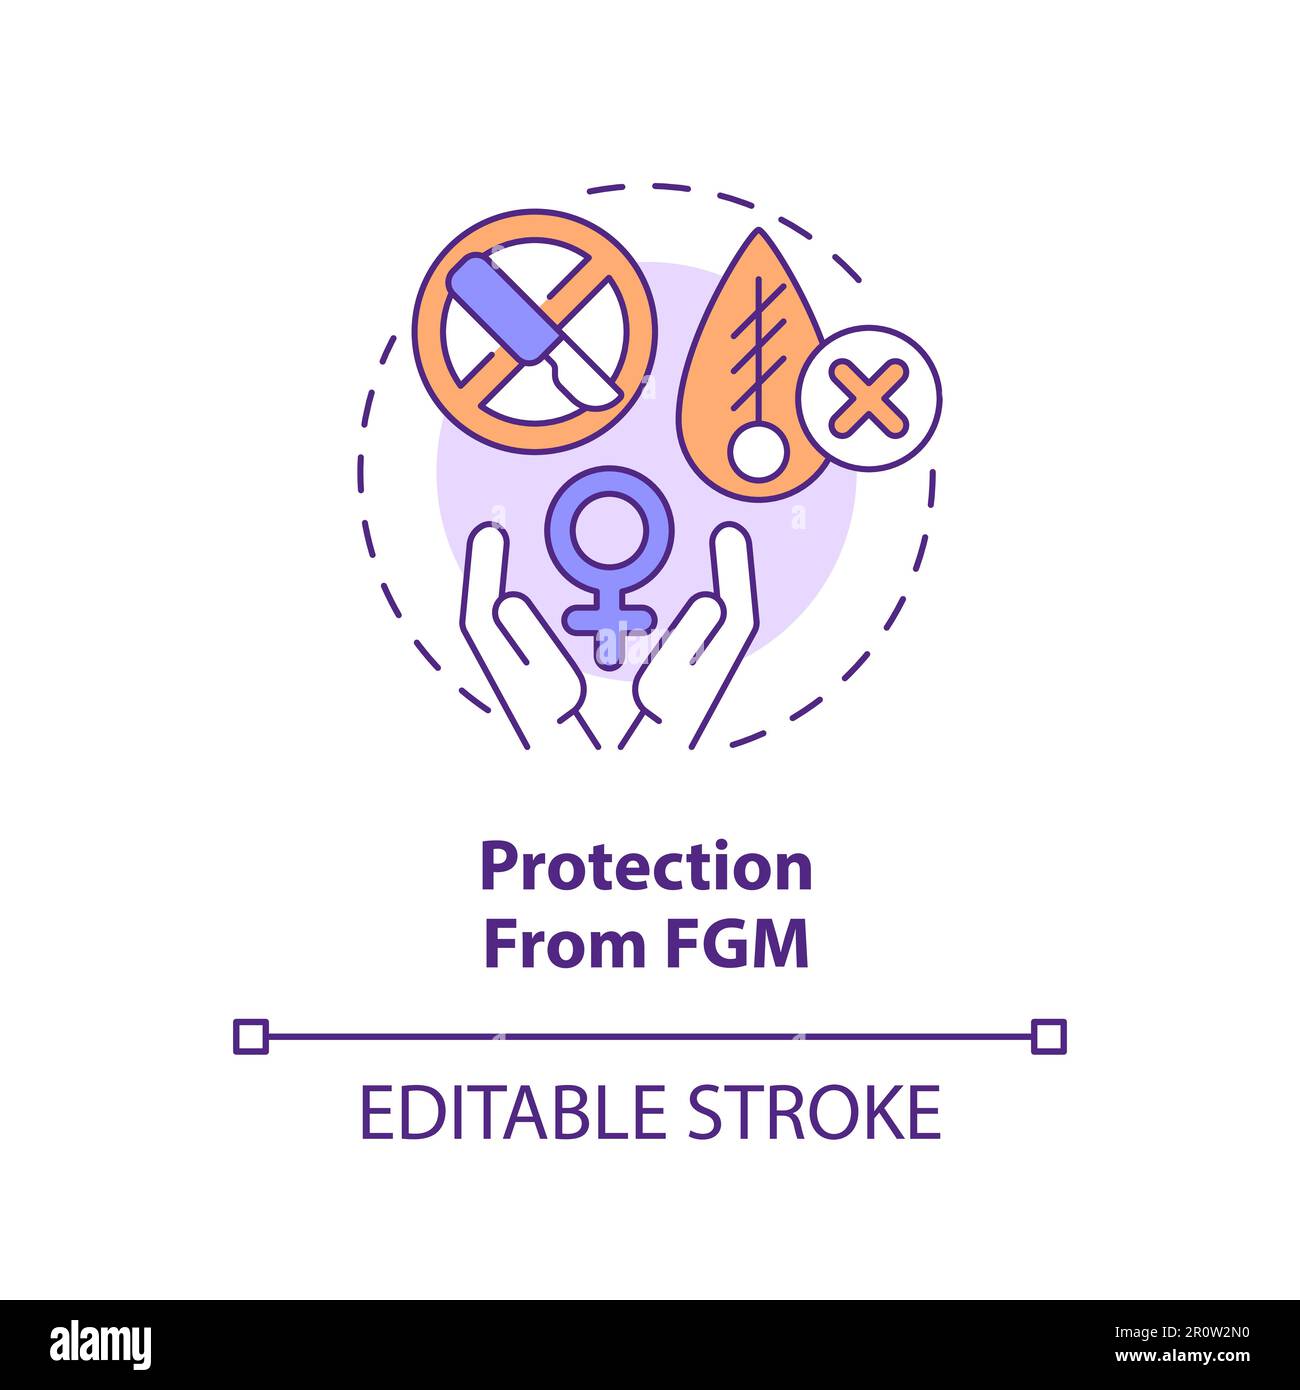 Protection from FGM concept icon Stock Vector